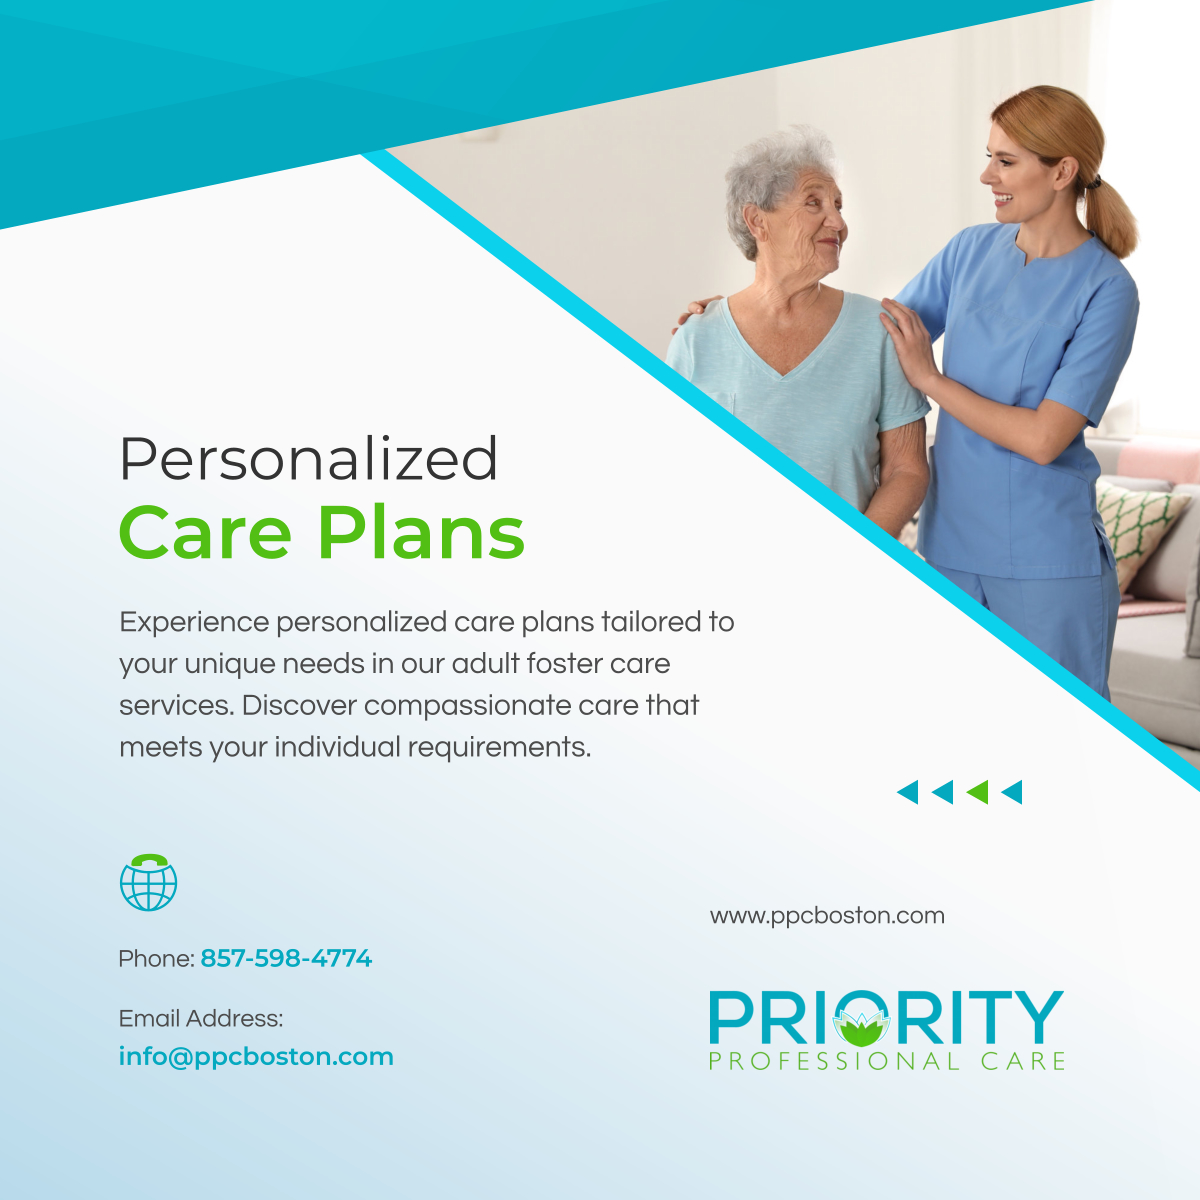 Experience compassionate care with personalized care plans in our adult foster care services. Your well-being is our priority. Visit our website to learn more: ppcboston.com. 

#PersonalizedCare #CaregiverSupport #MentalHealthMatters #TrainingTuesday